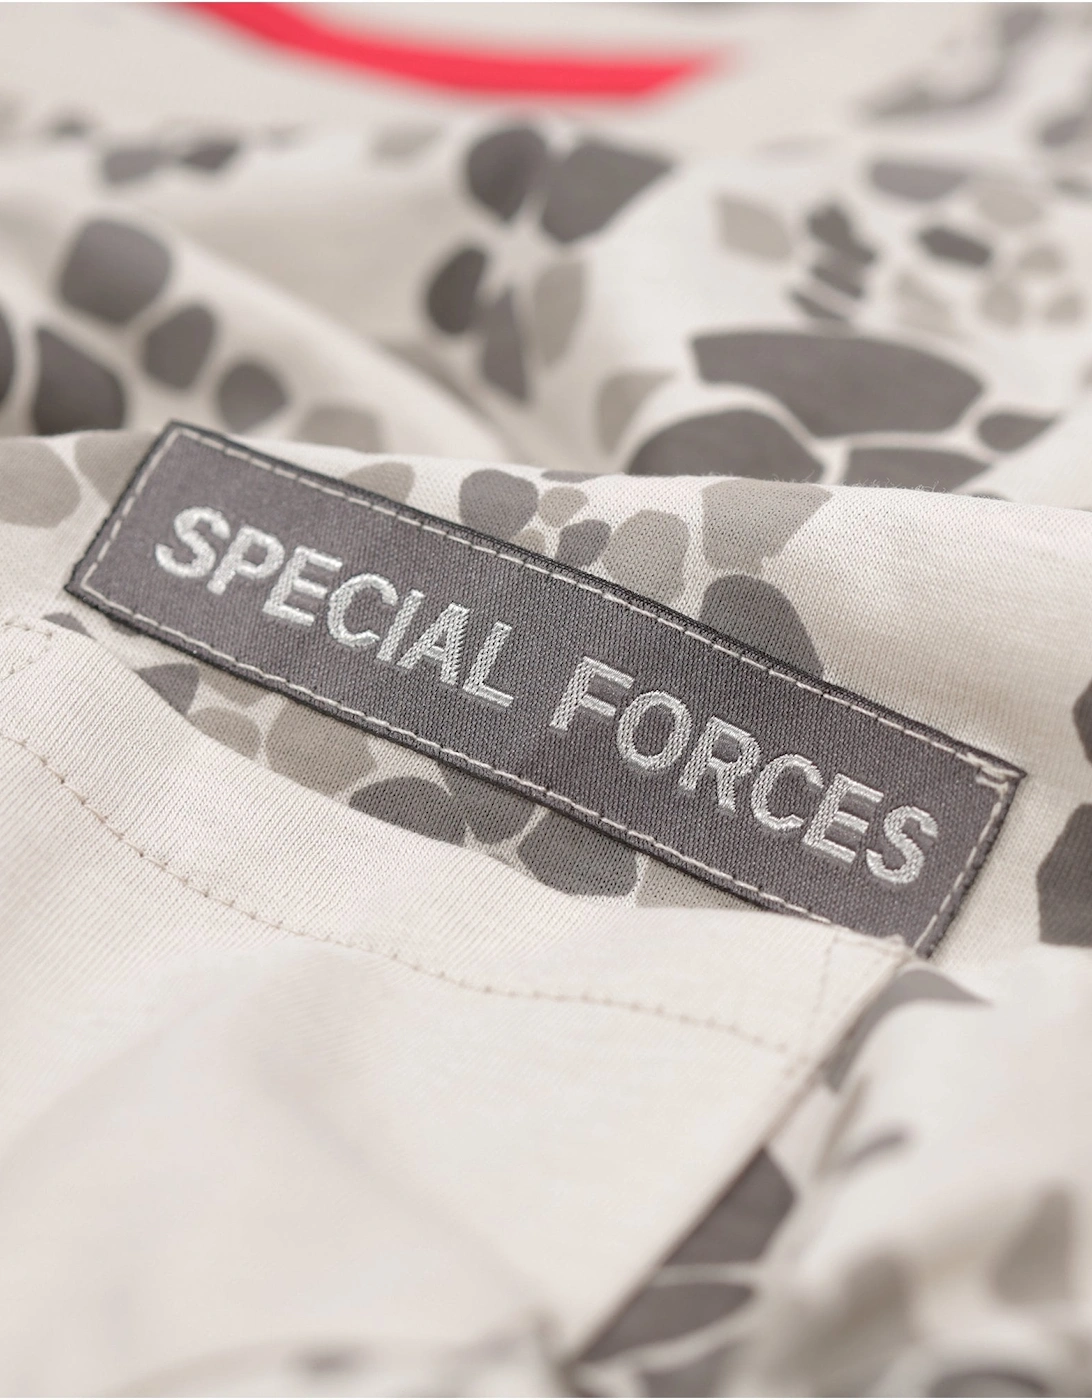 Special Forces Pocket T-Shirt | Stone Camo